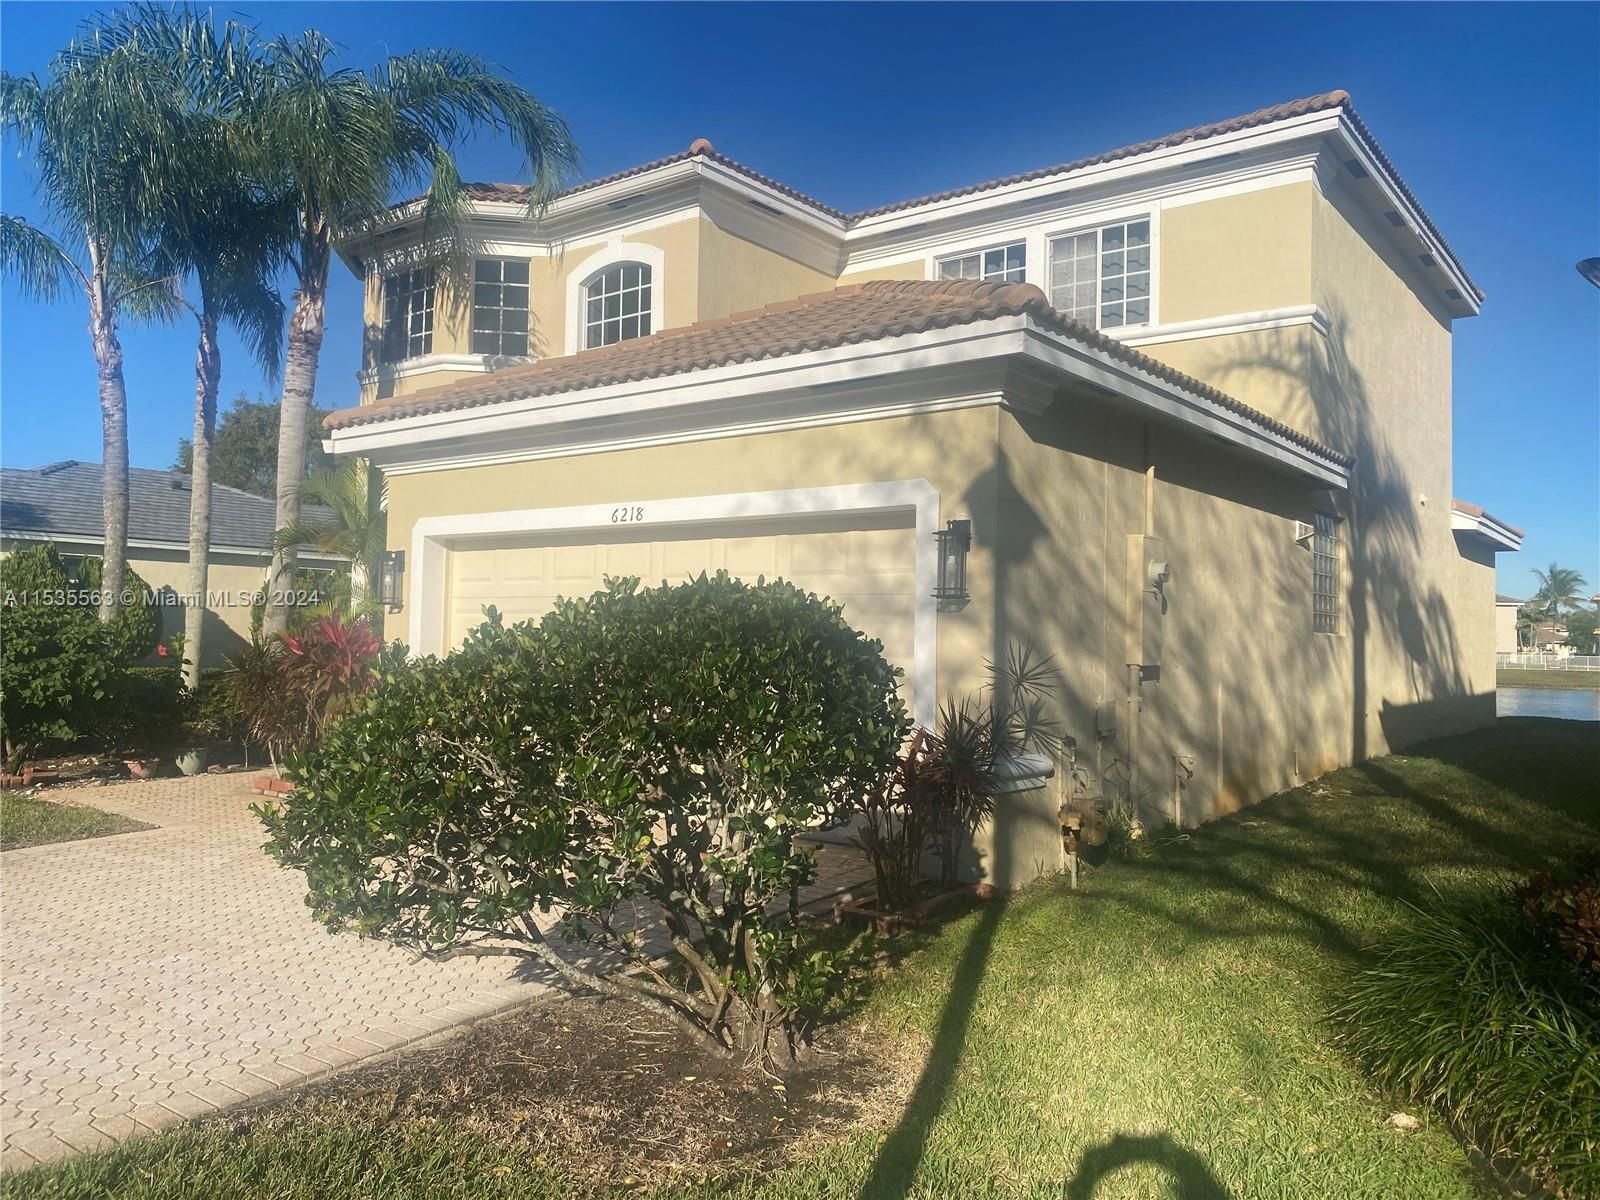 Real estate property located at 6218 194th Ave, Broward County, BIG SKY NORTH RESIDENTIAL, Pembroke Pines, FL